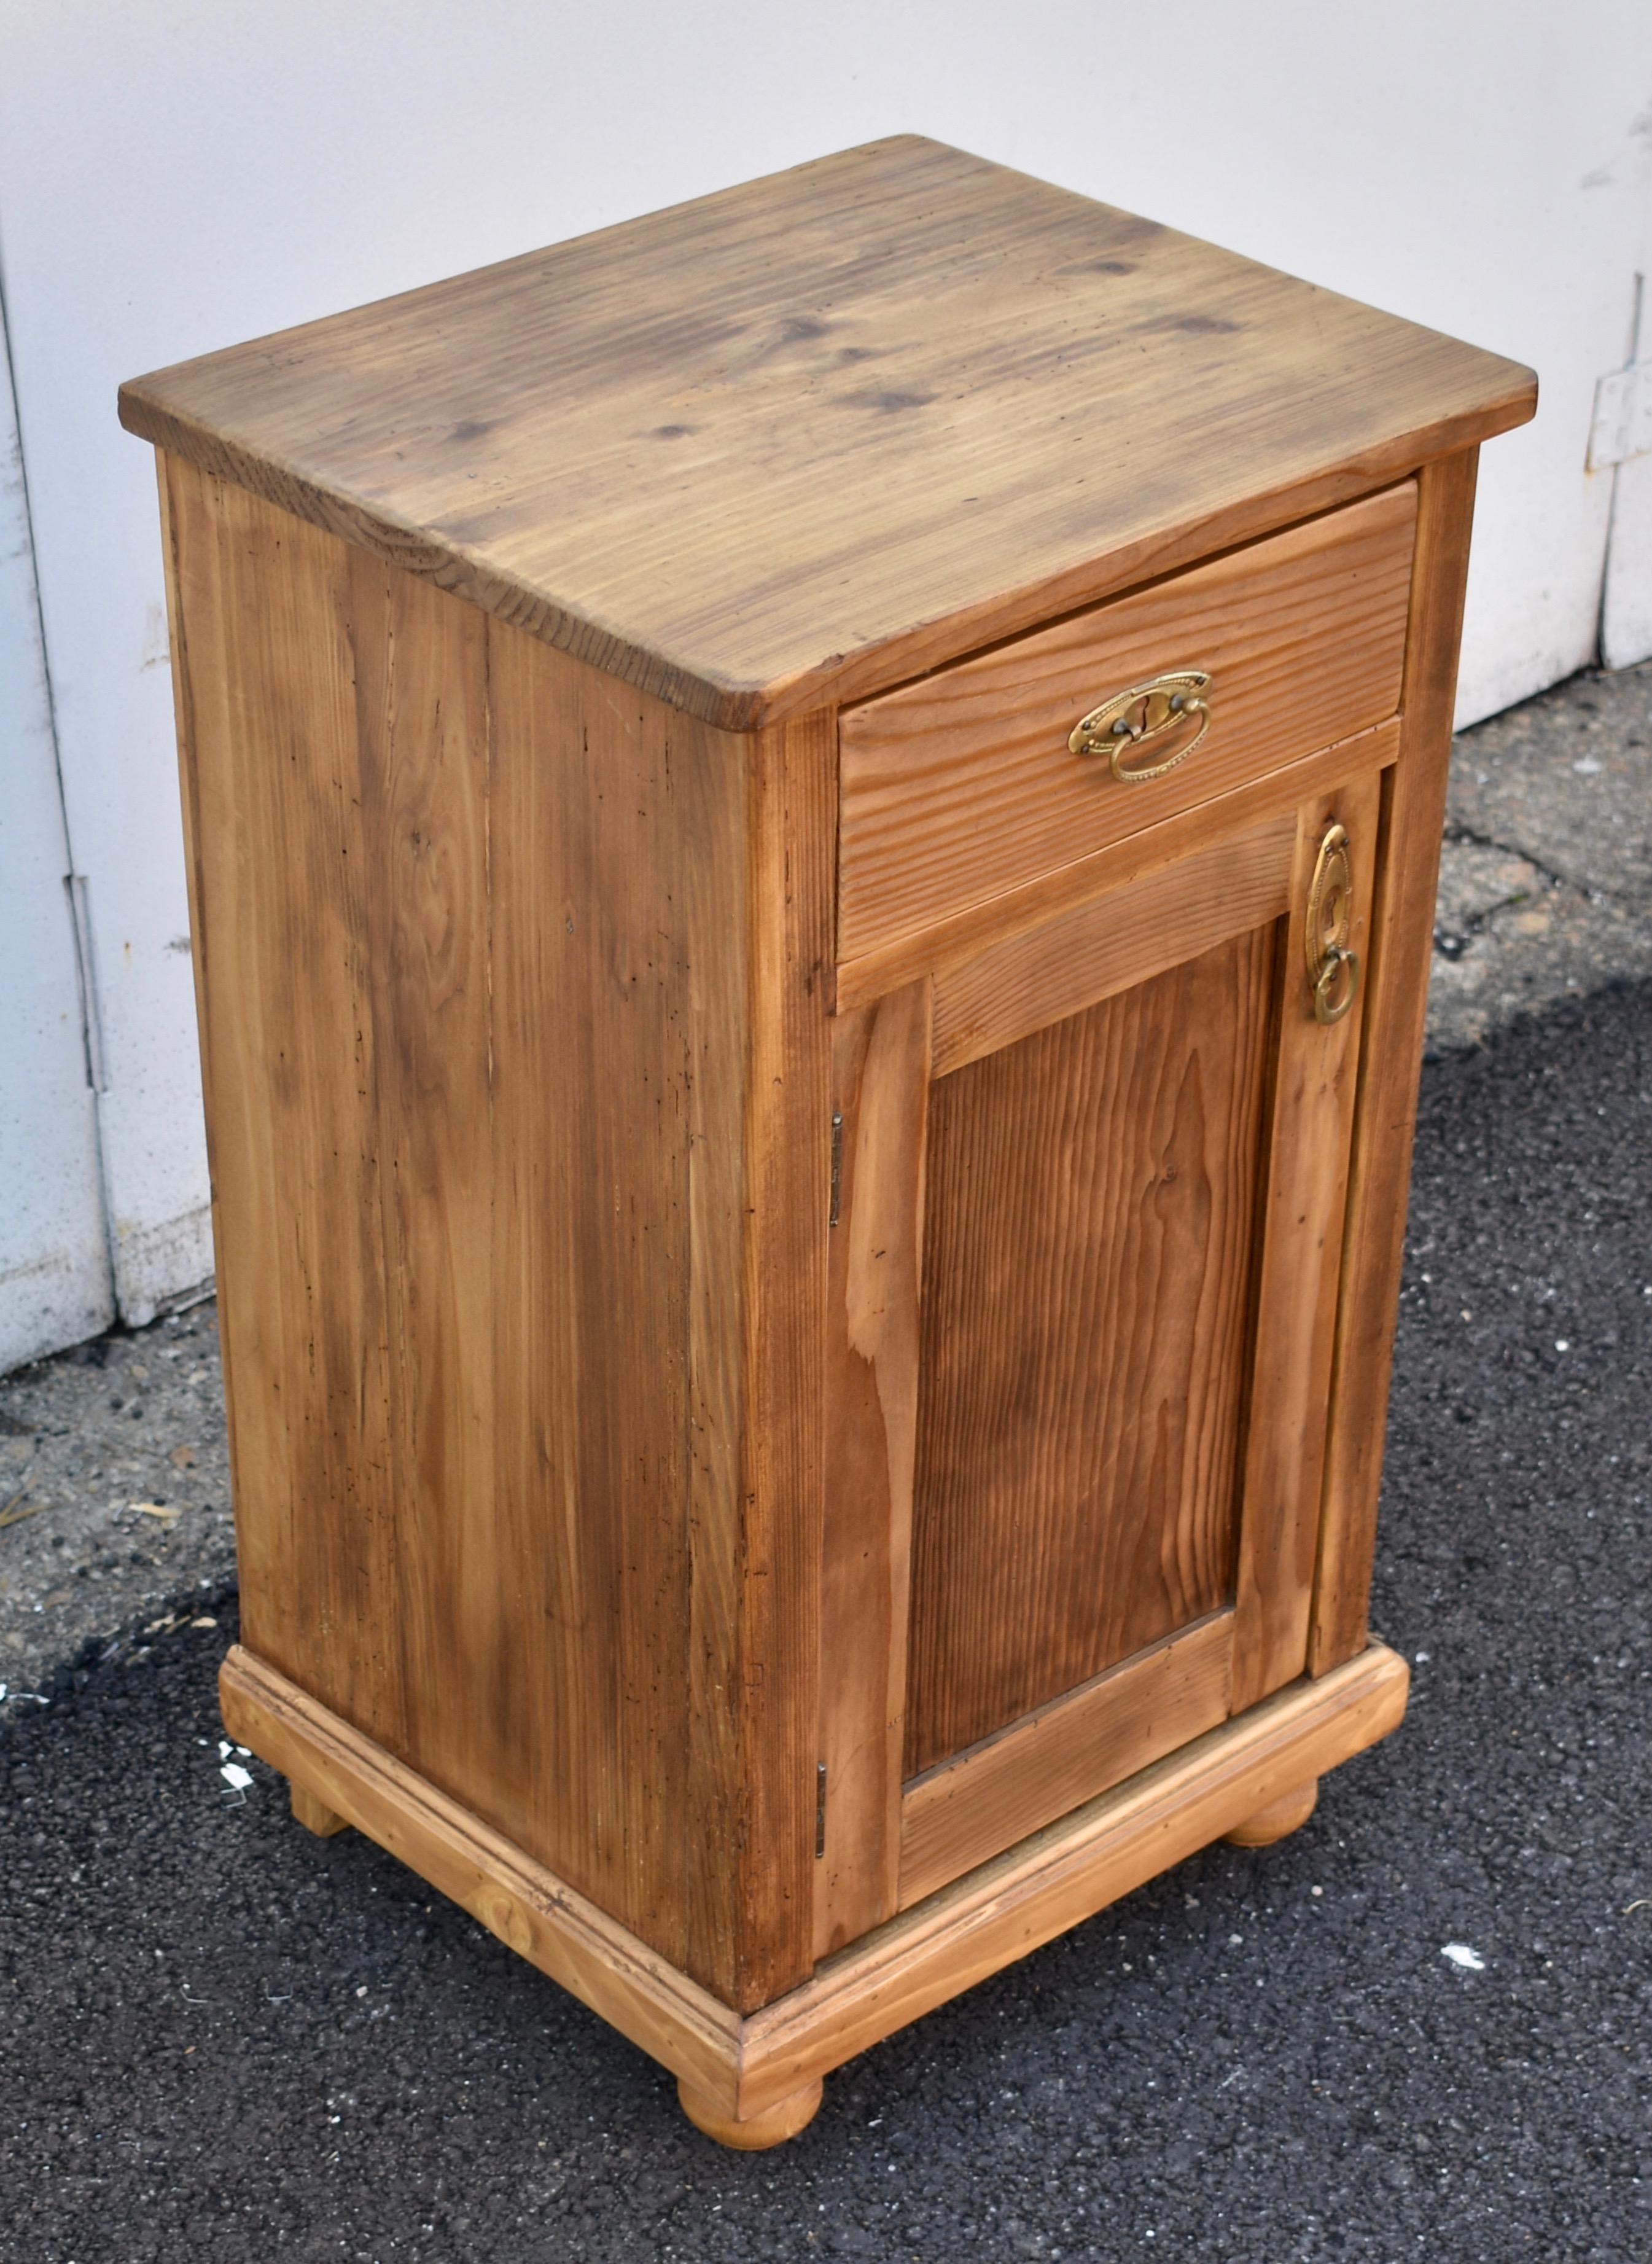 Dutch Pine Nightstand with One Door and One Drawer